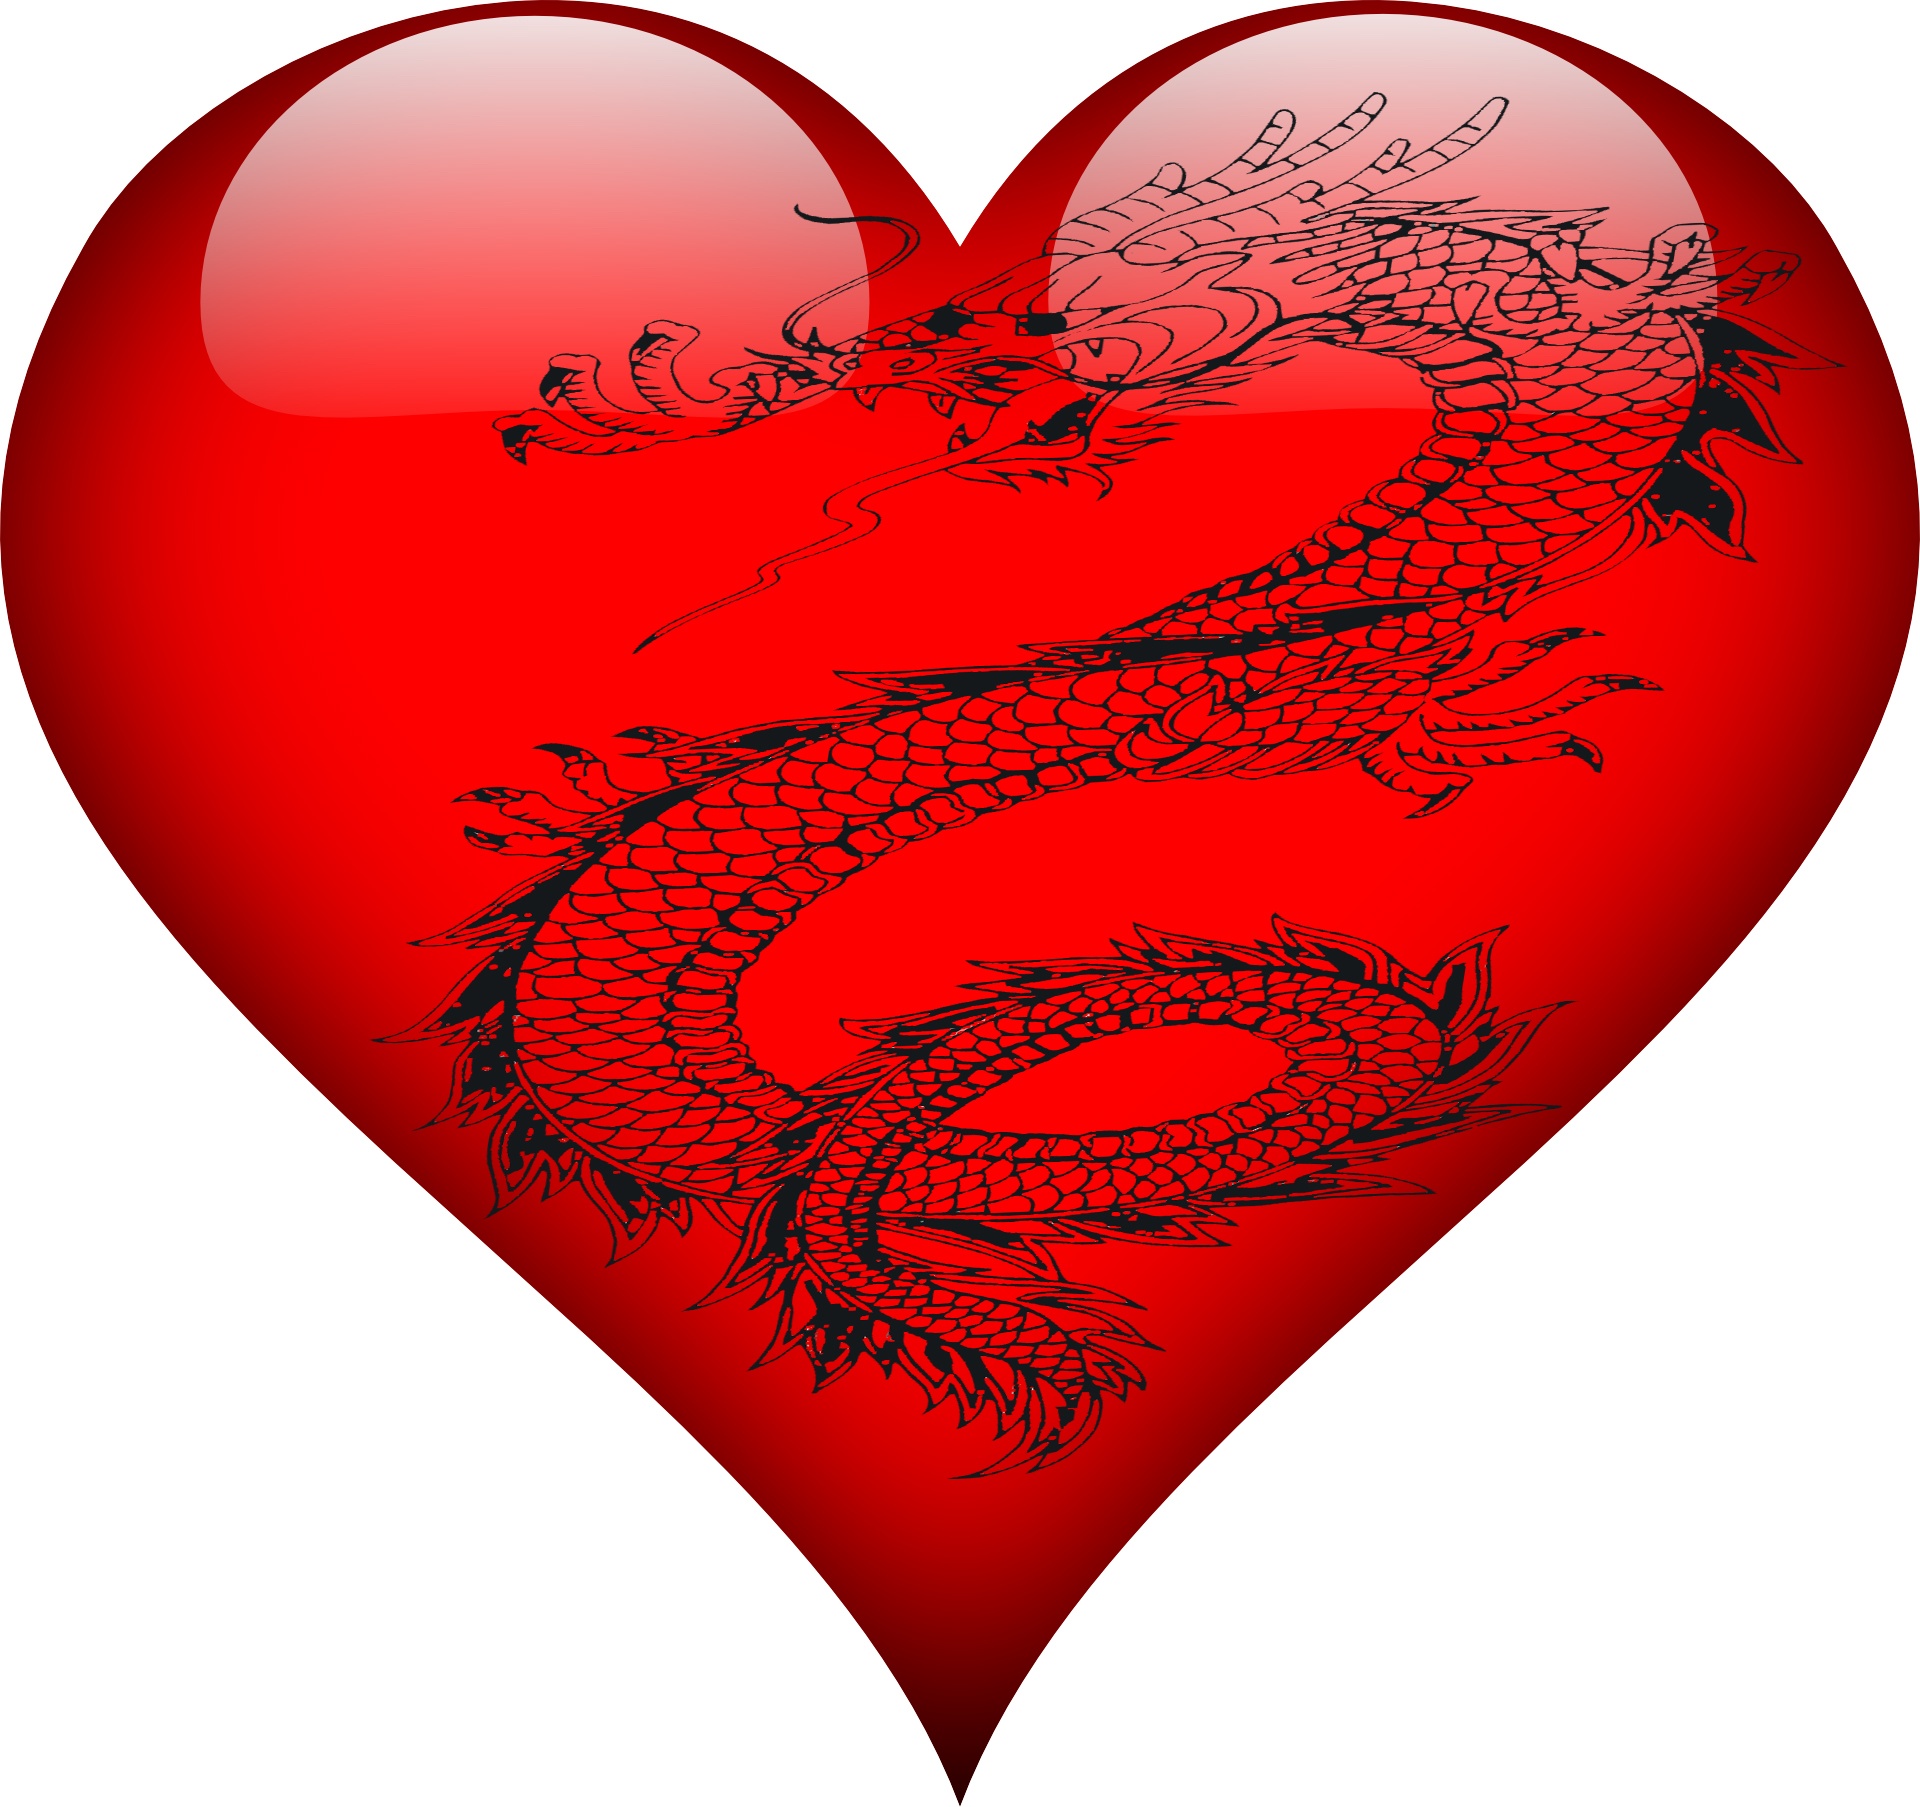 heart-of-a-dragon-2-free-stock-photo-public-domain-pictures